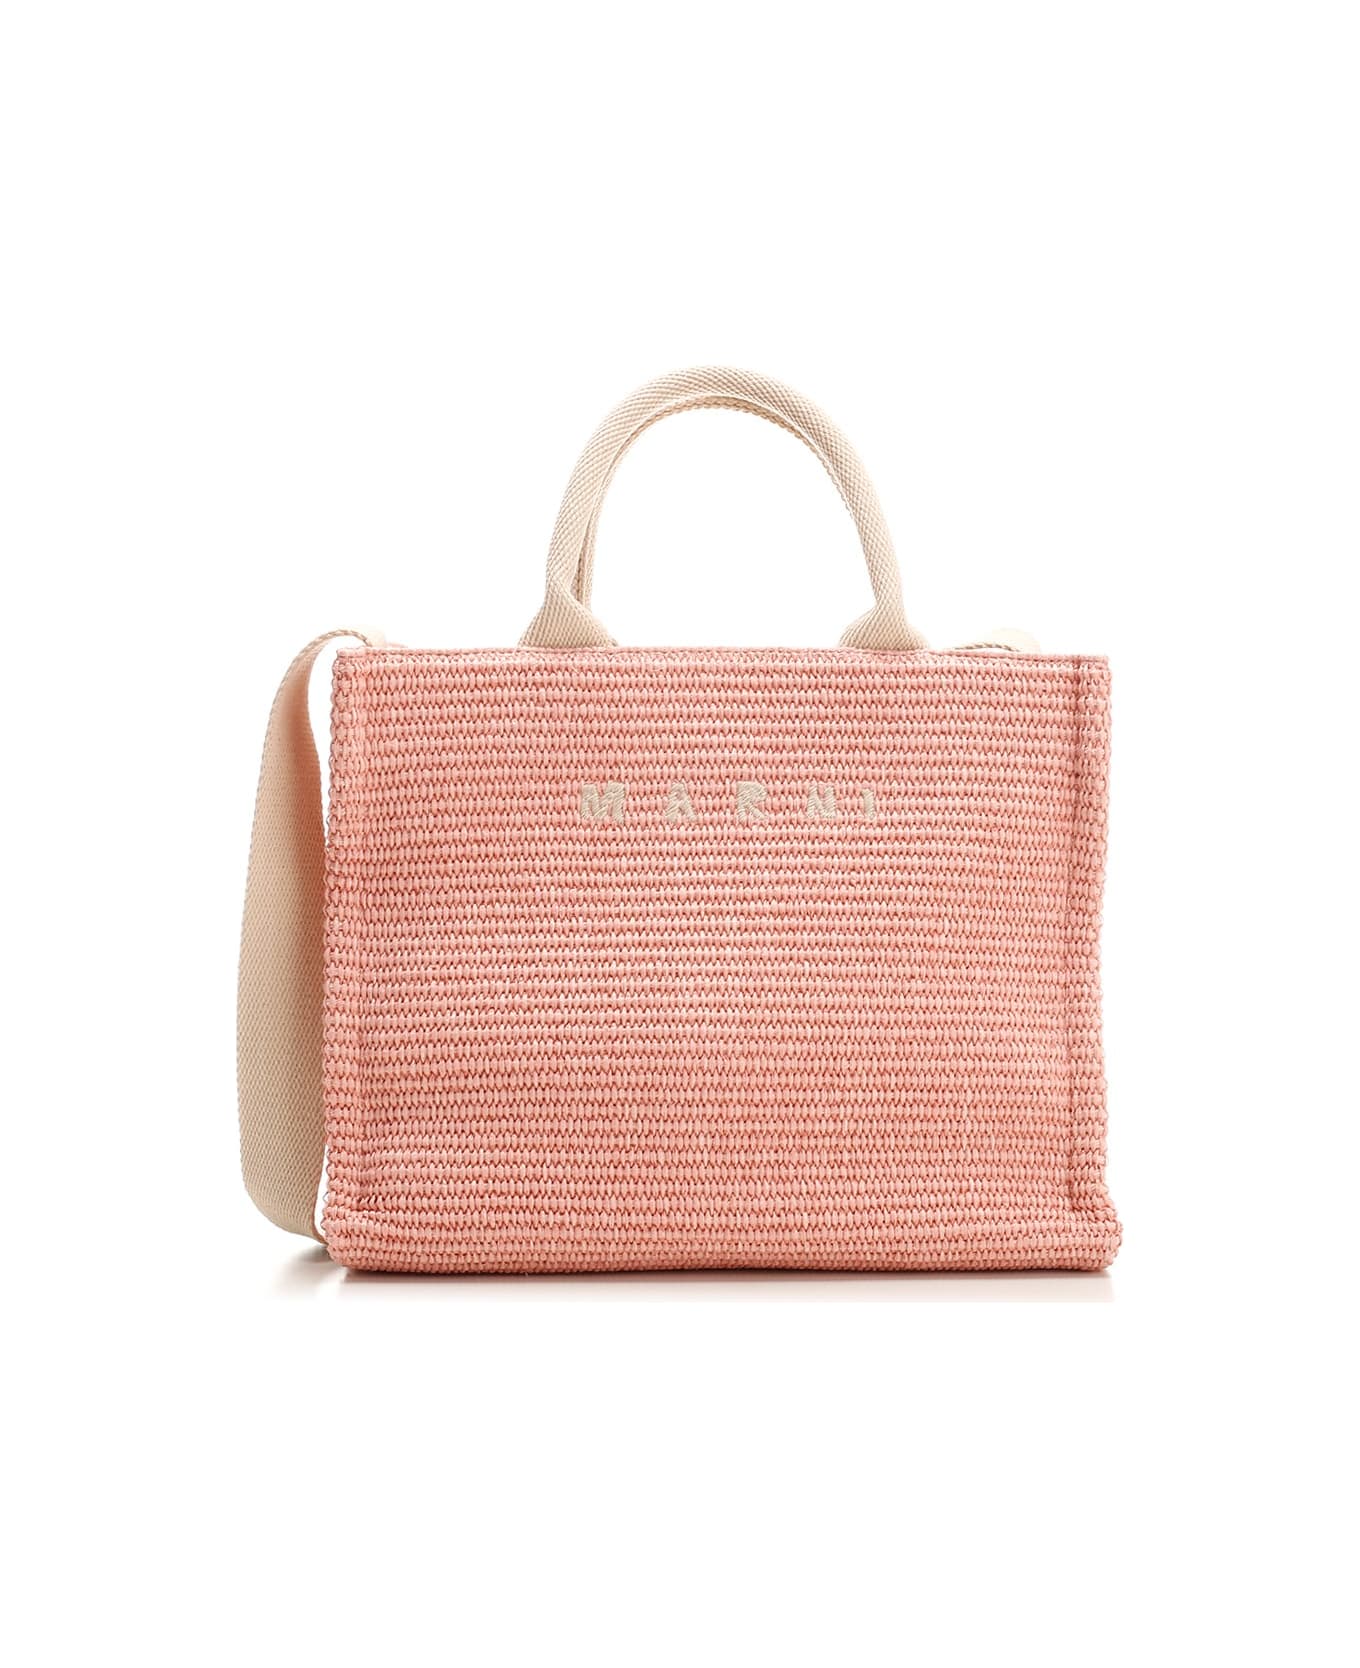 Marni 'east/west' Small Tote Bag - Rosa トートバッグ